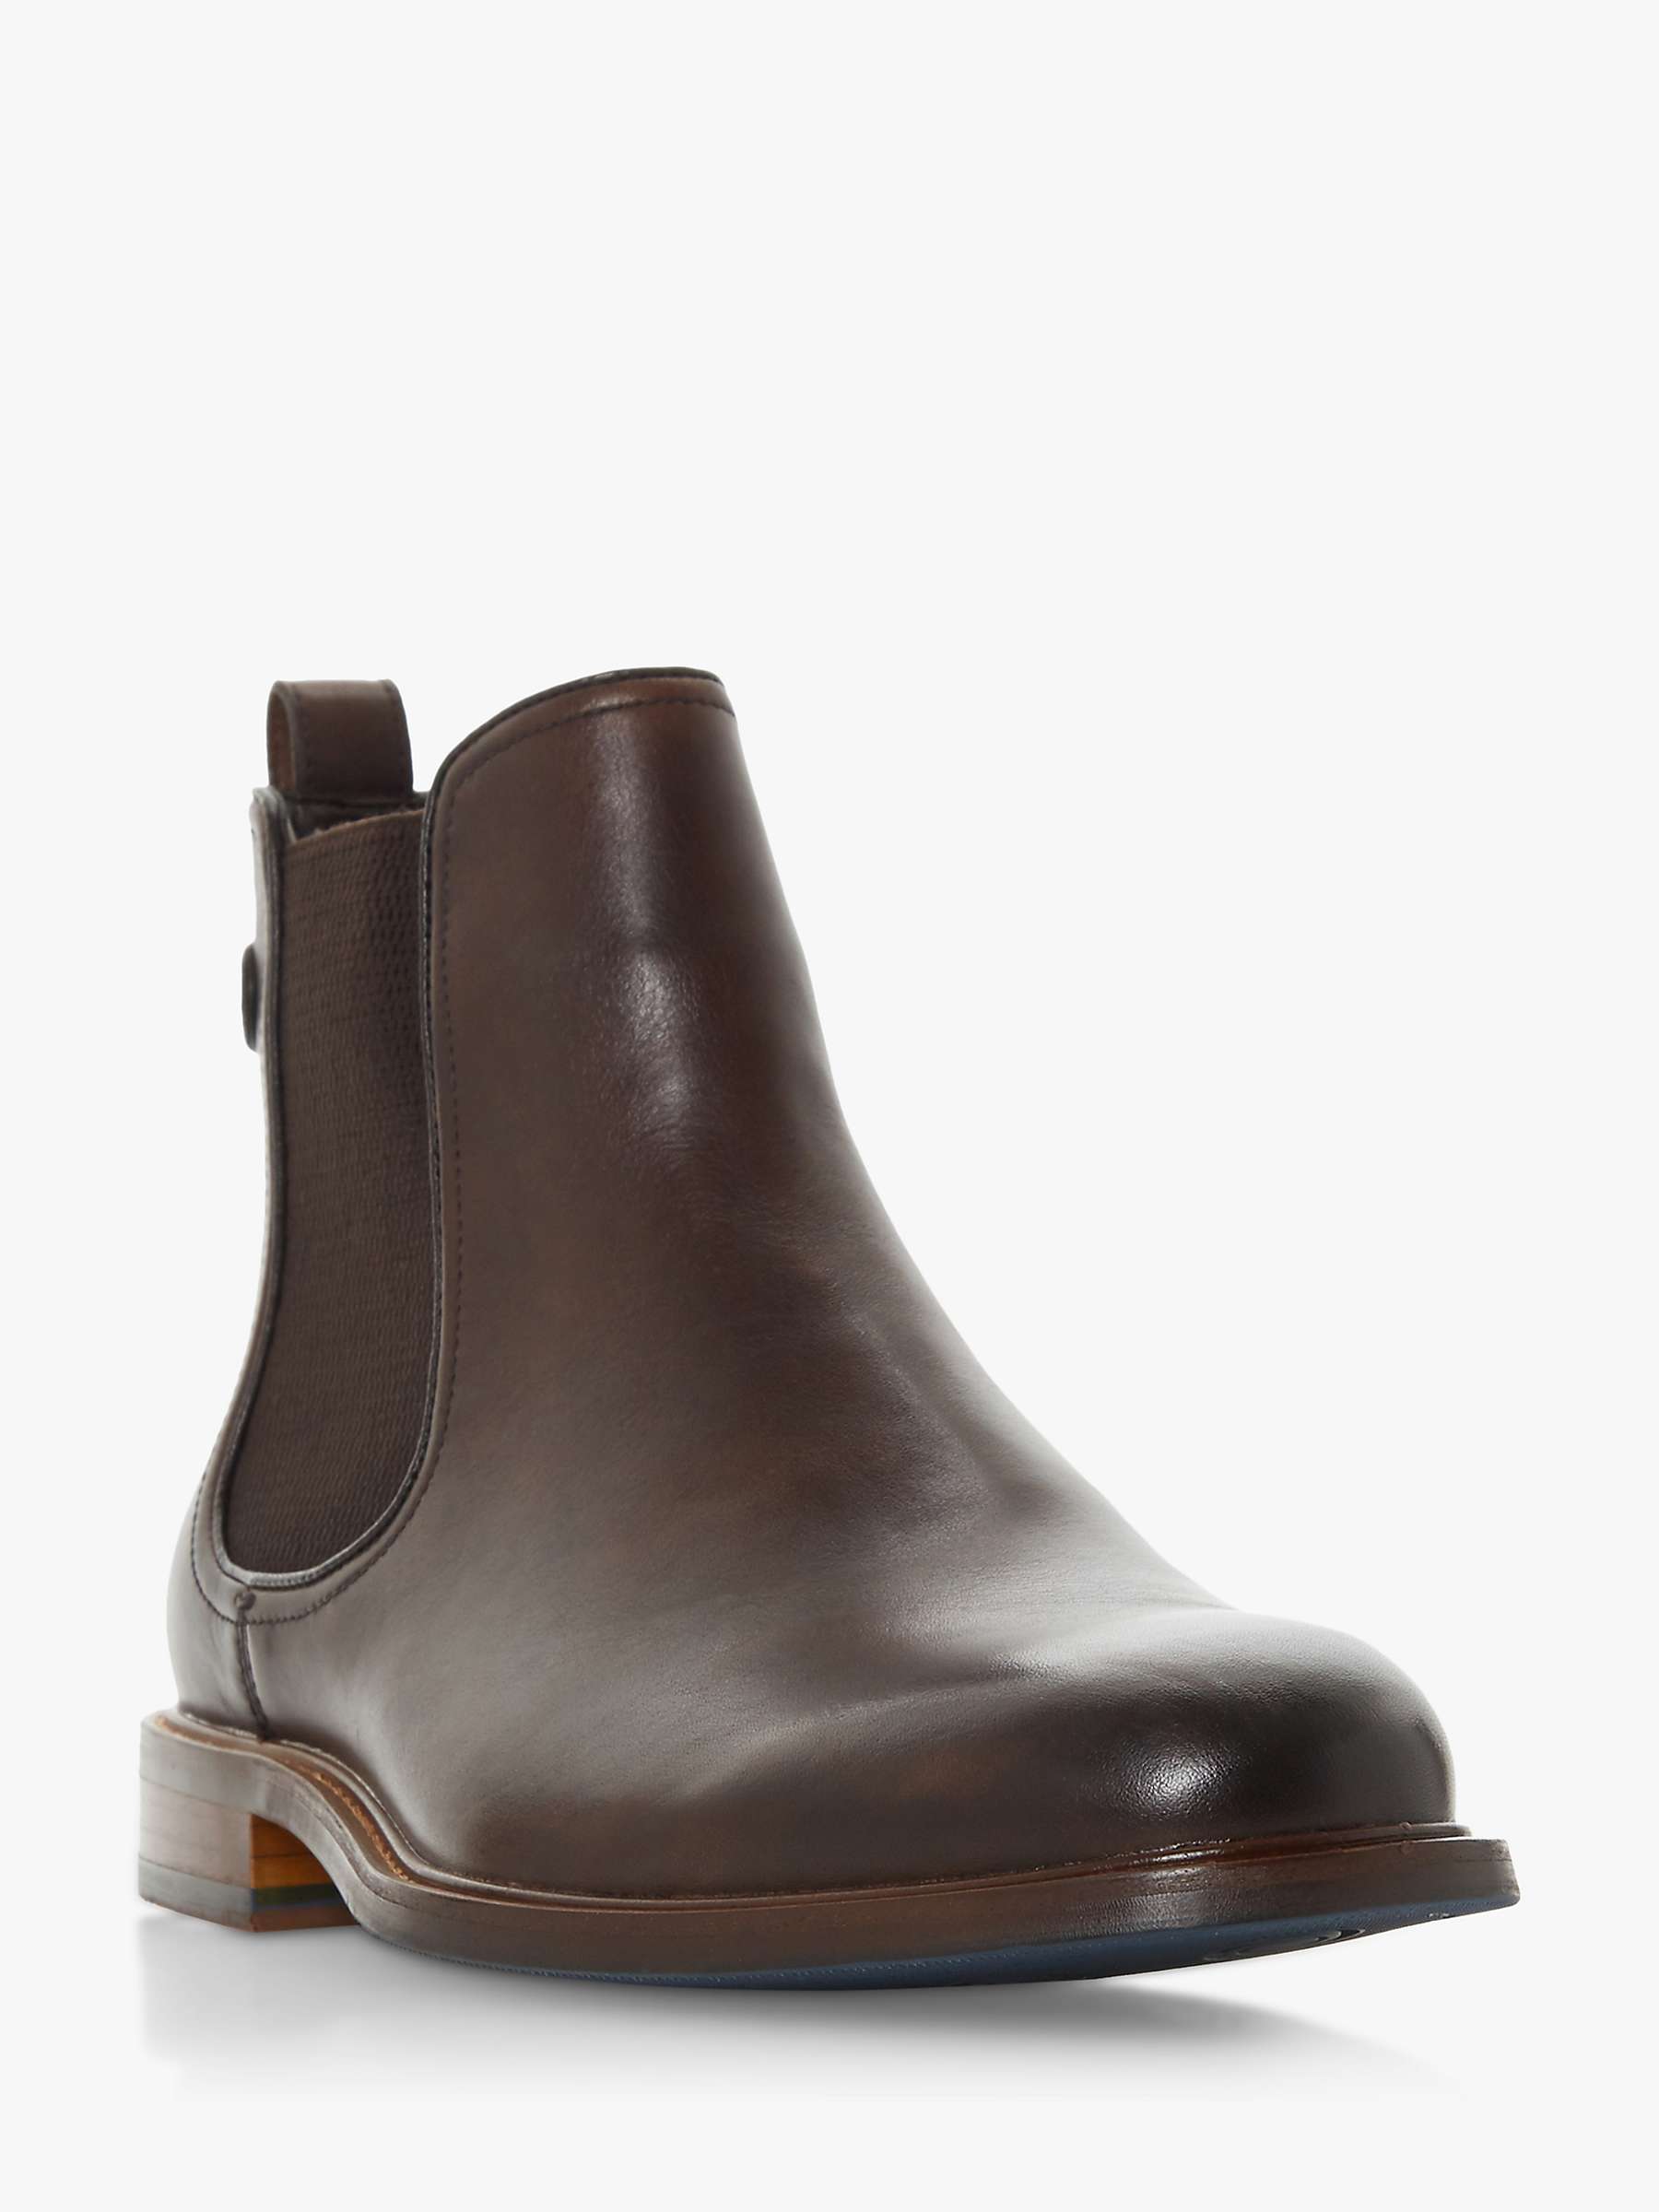 Dune Character Leather Chelsea Boots, Brown at John Lewis & Partners